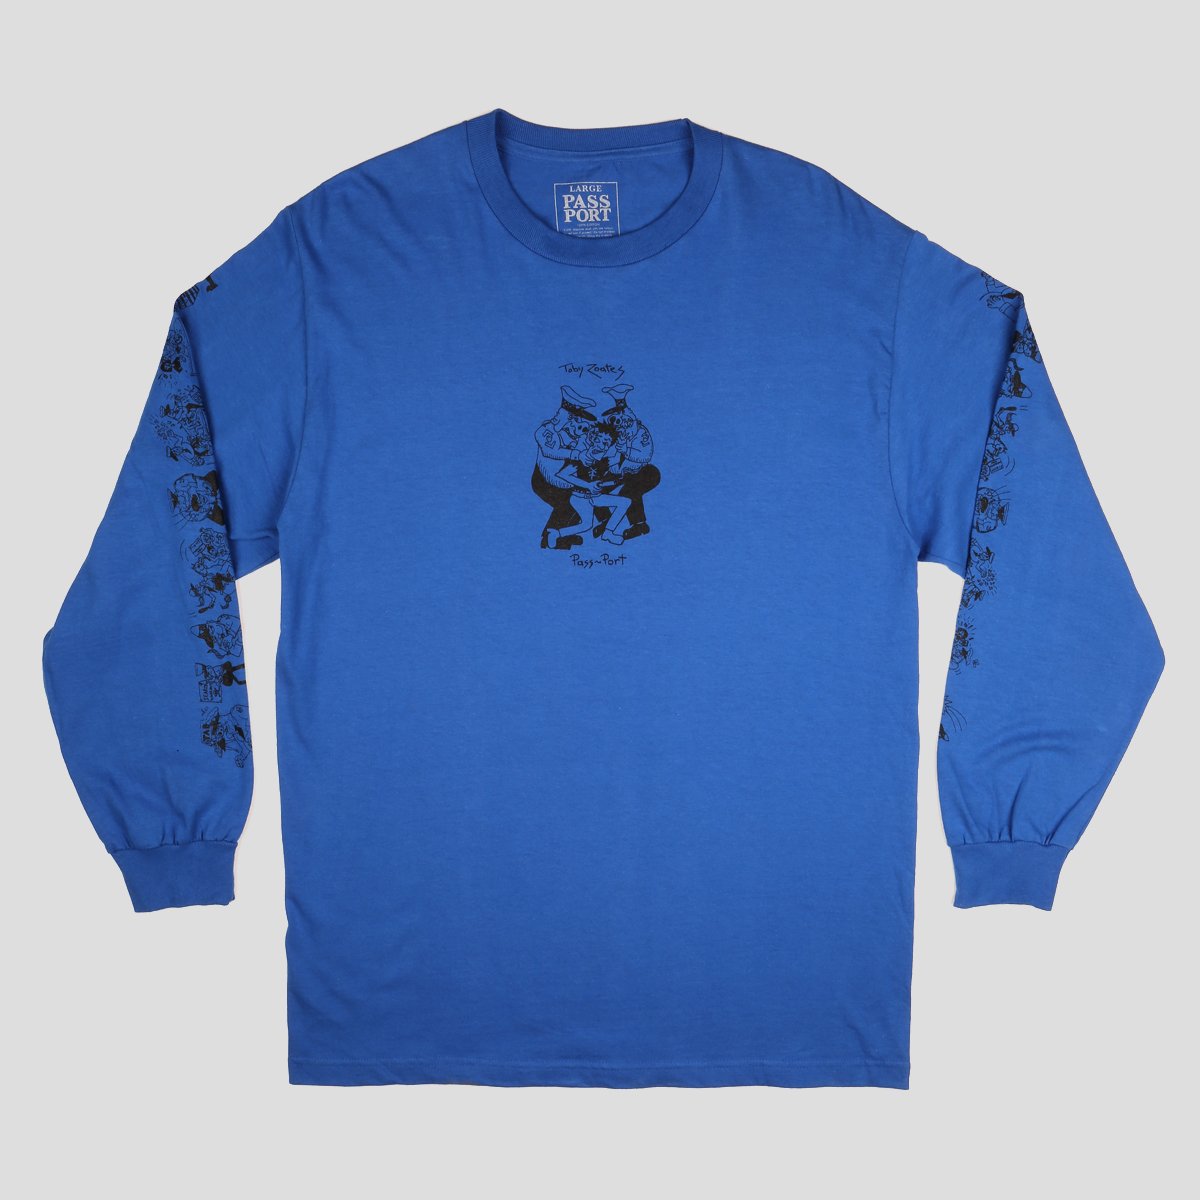 PASS~PORT TOBY ZOATES "COPPERS" L/S TEE ROYAL BLUE